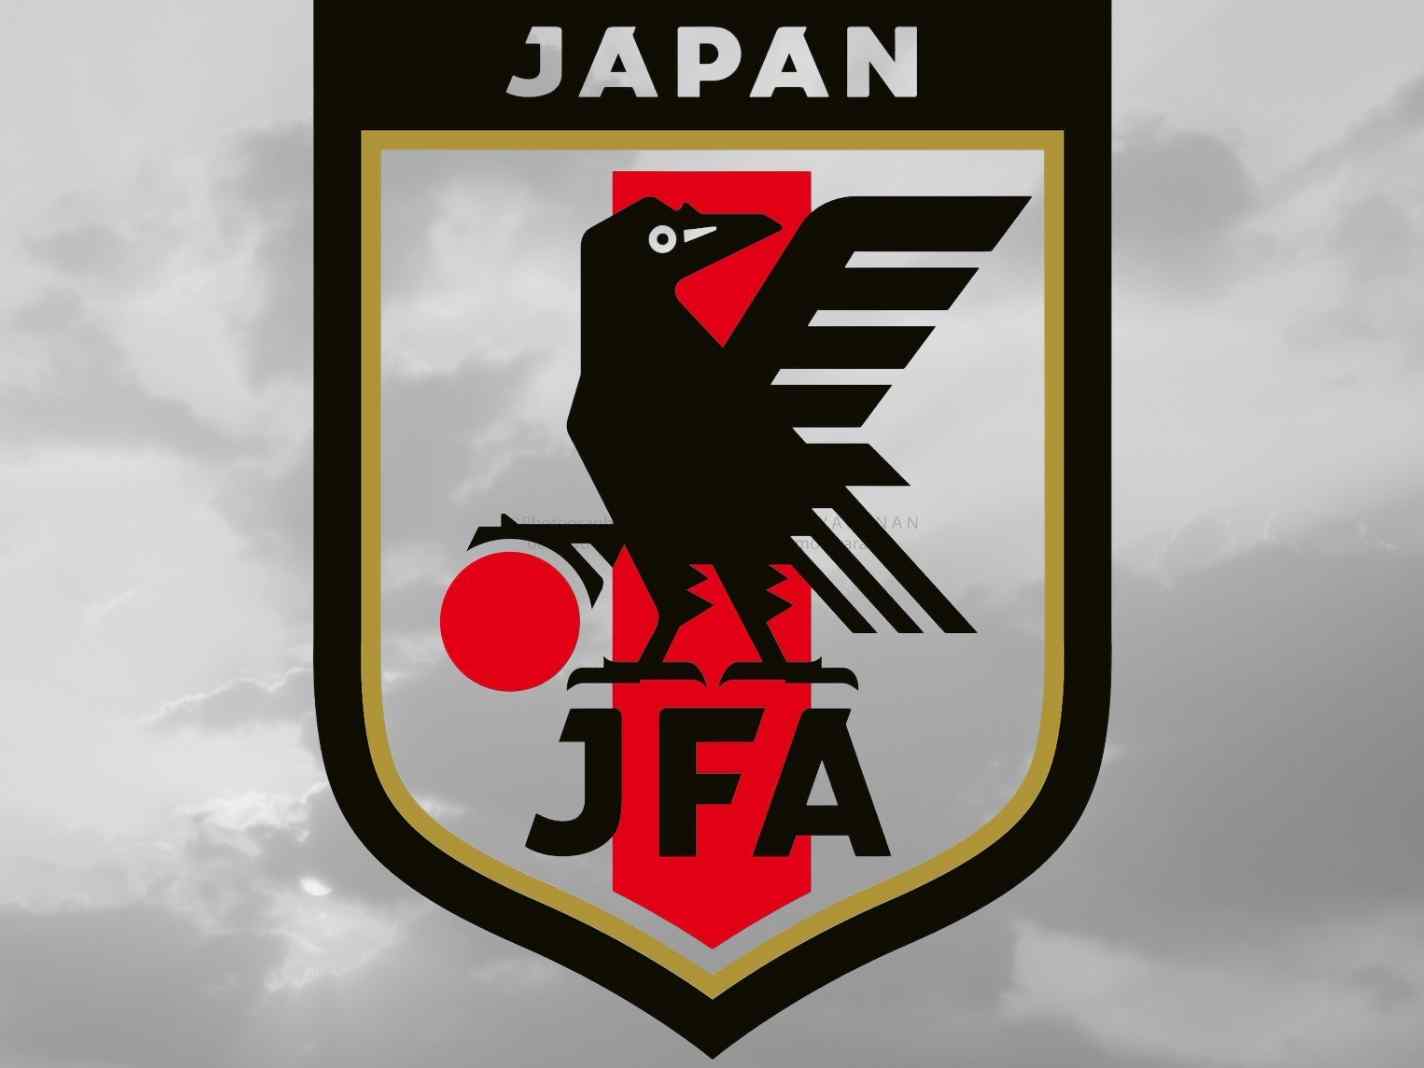 5 Games, 22 Goals: Just When Did Japan Get So Good in Football